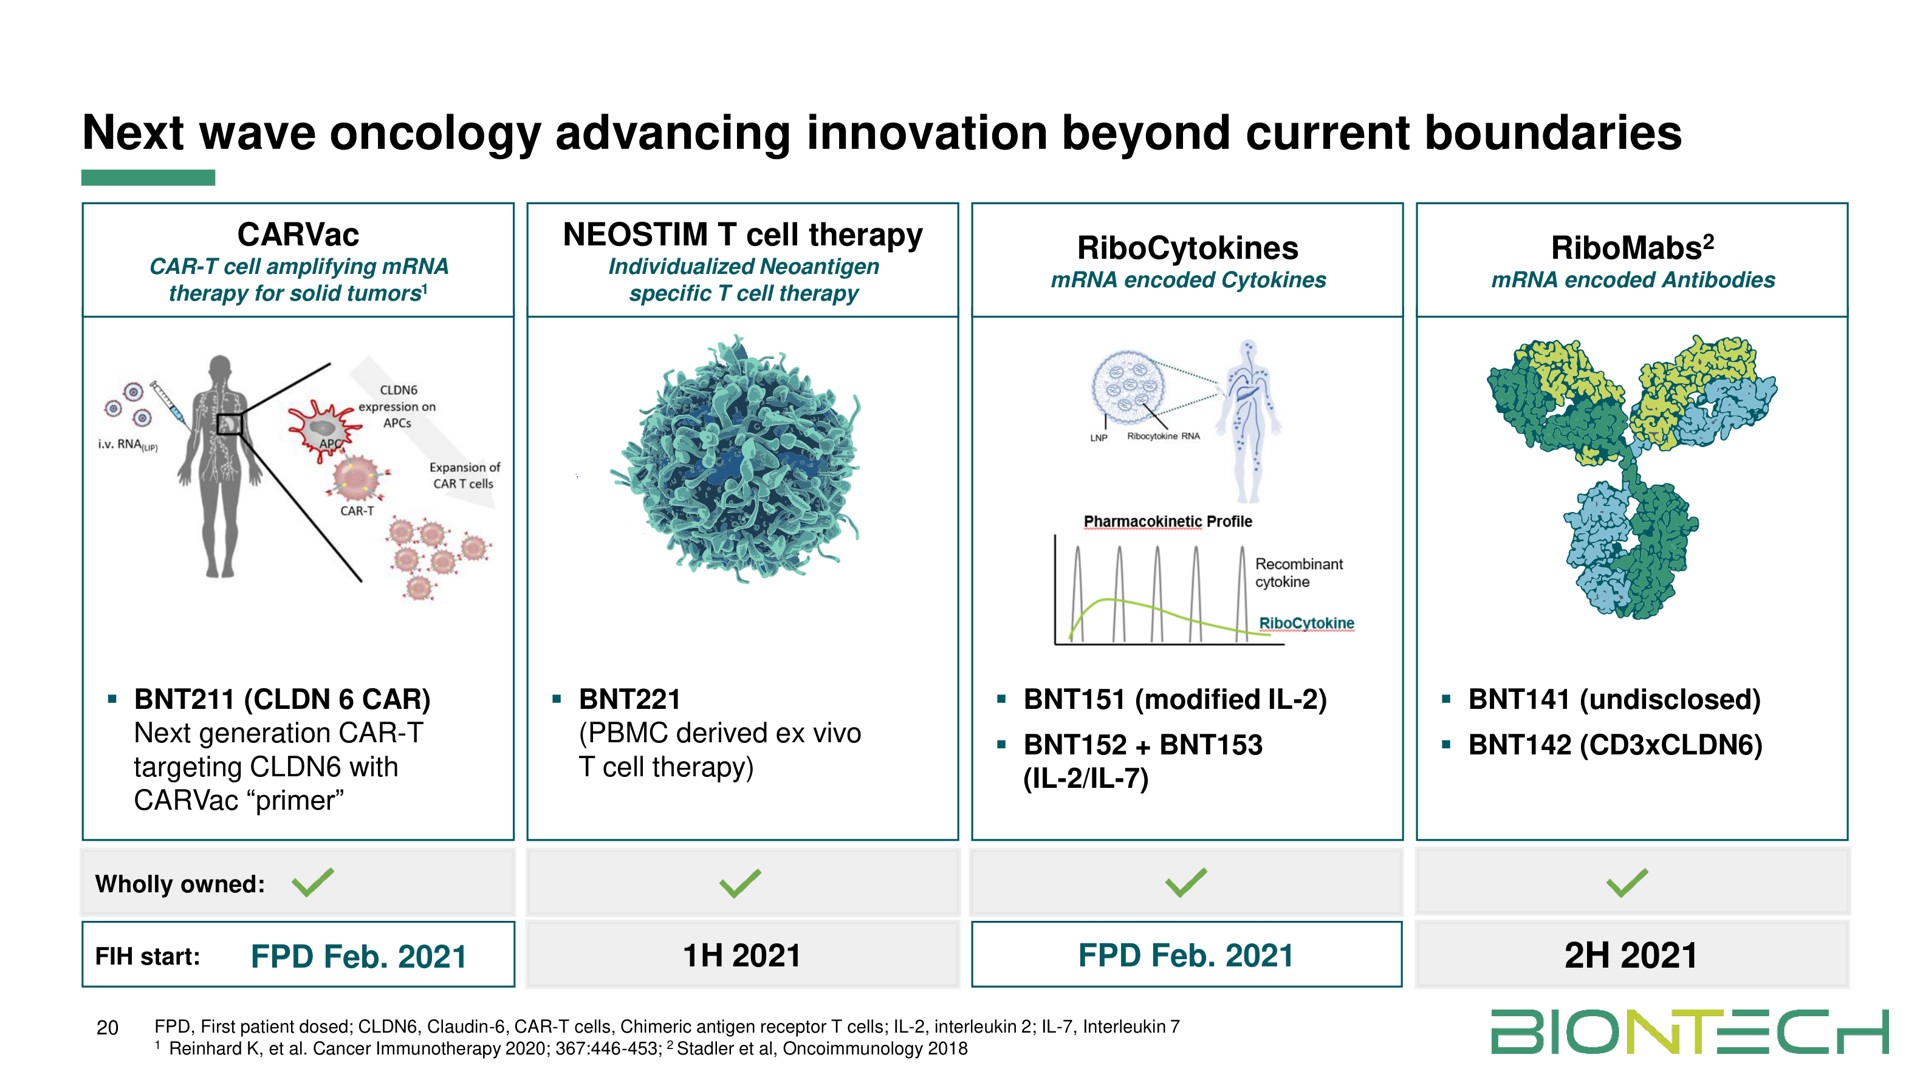 next wave oncology advancing innovation beyond current boundaries | BioNTech